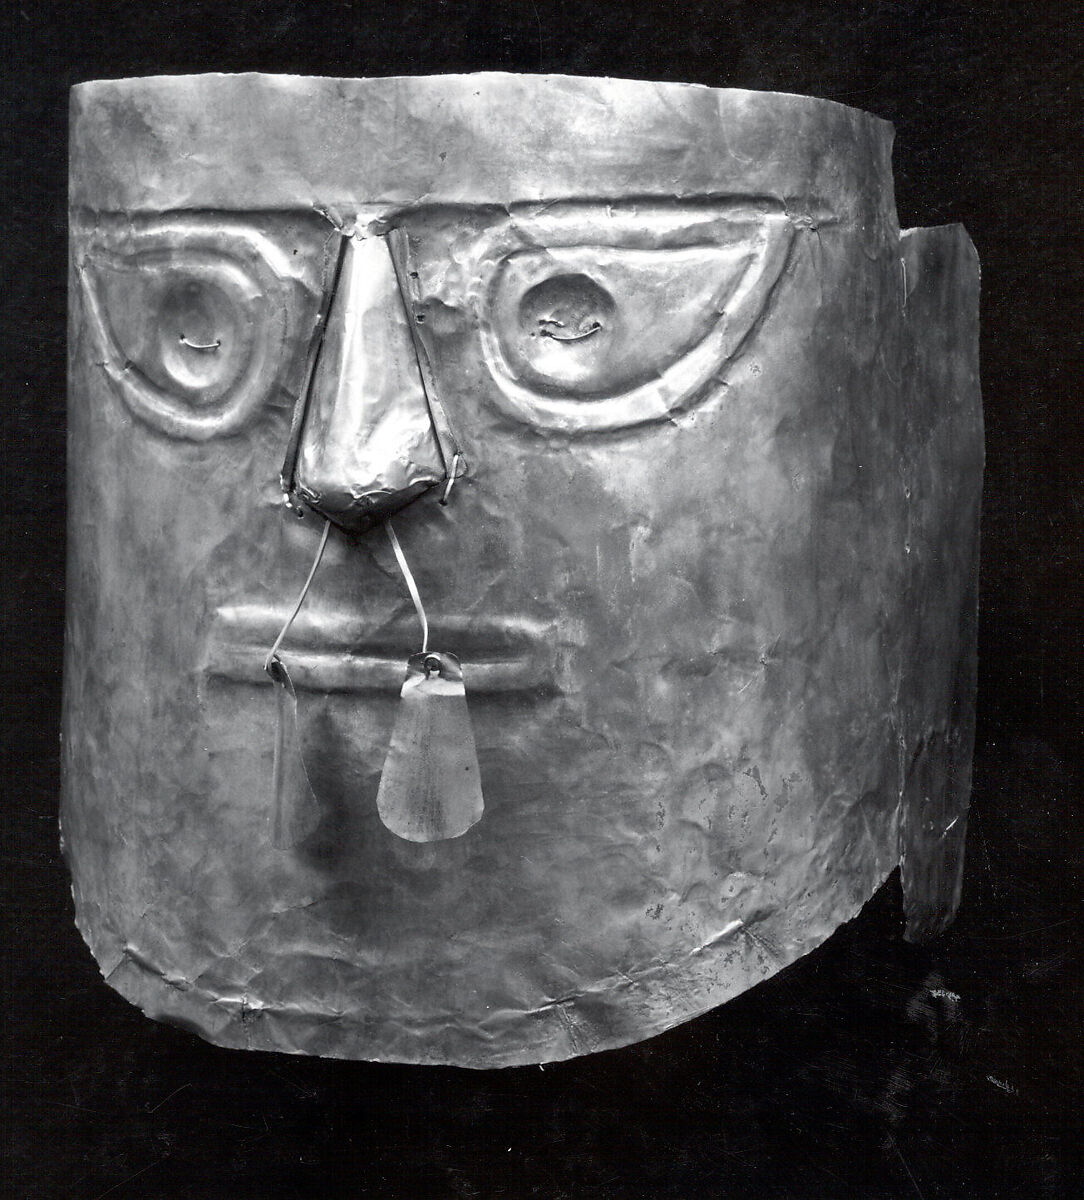 Gold Funerary Mask, Gold, pigment, Lambayeque (Sicán) 